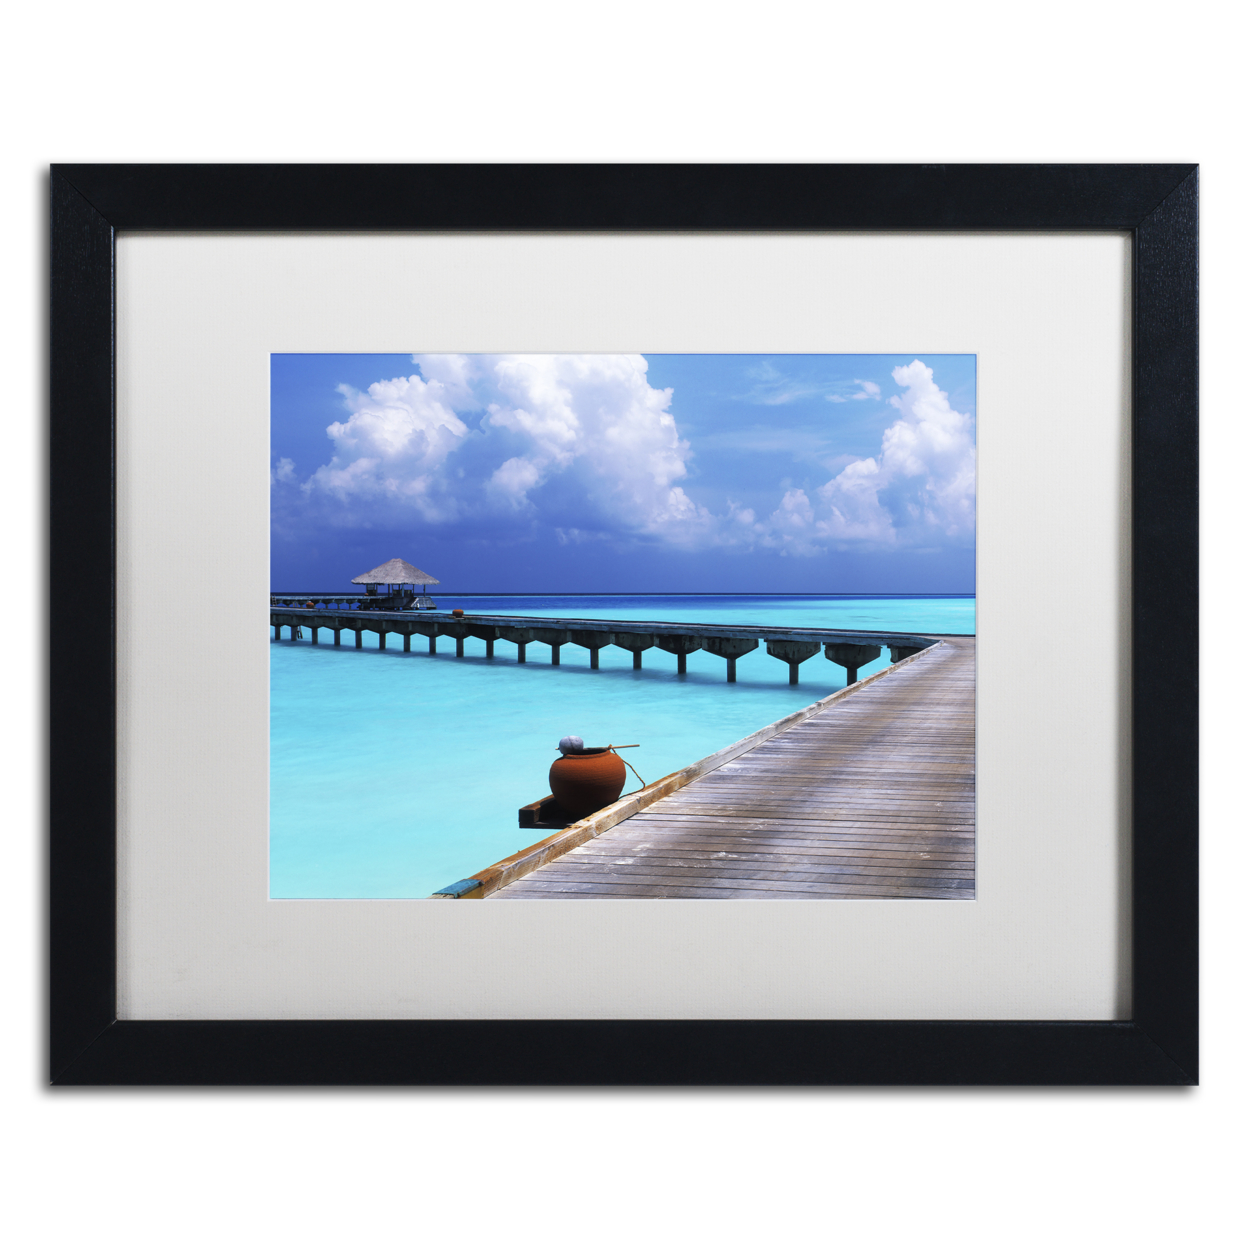 David Evans 'Into The Blue-Maldives' Black Wooden Framed Art 18 X 22 Inches